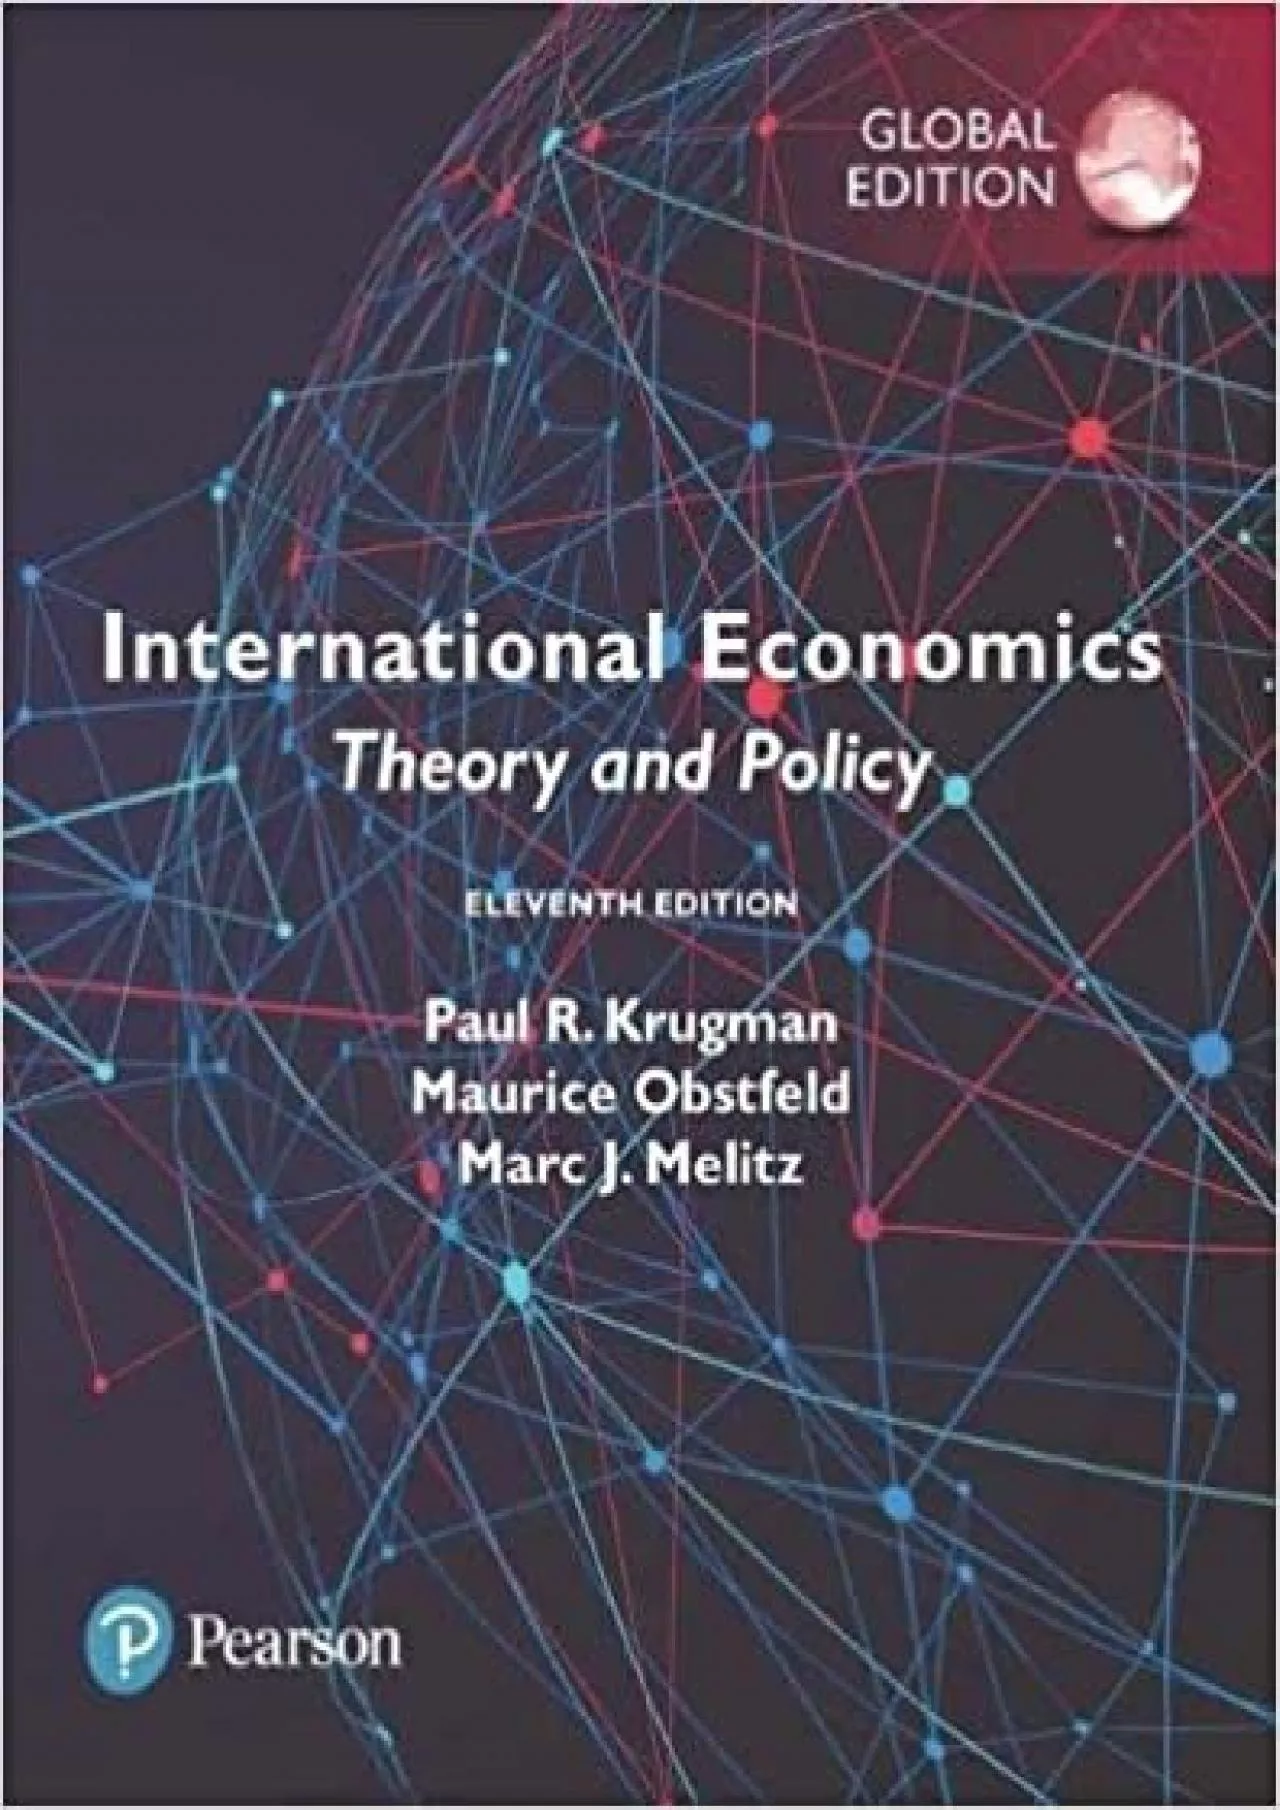 International Economics: Theory and Policy plus Pearson MyLab Economics with Pearson eText